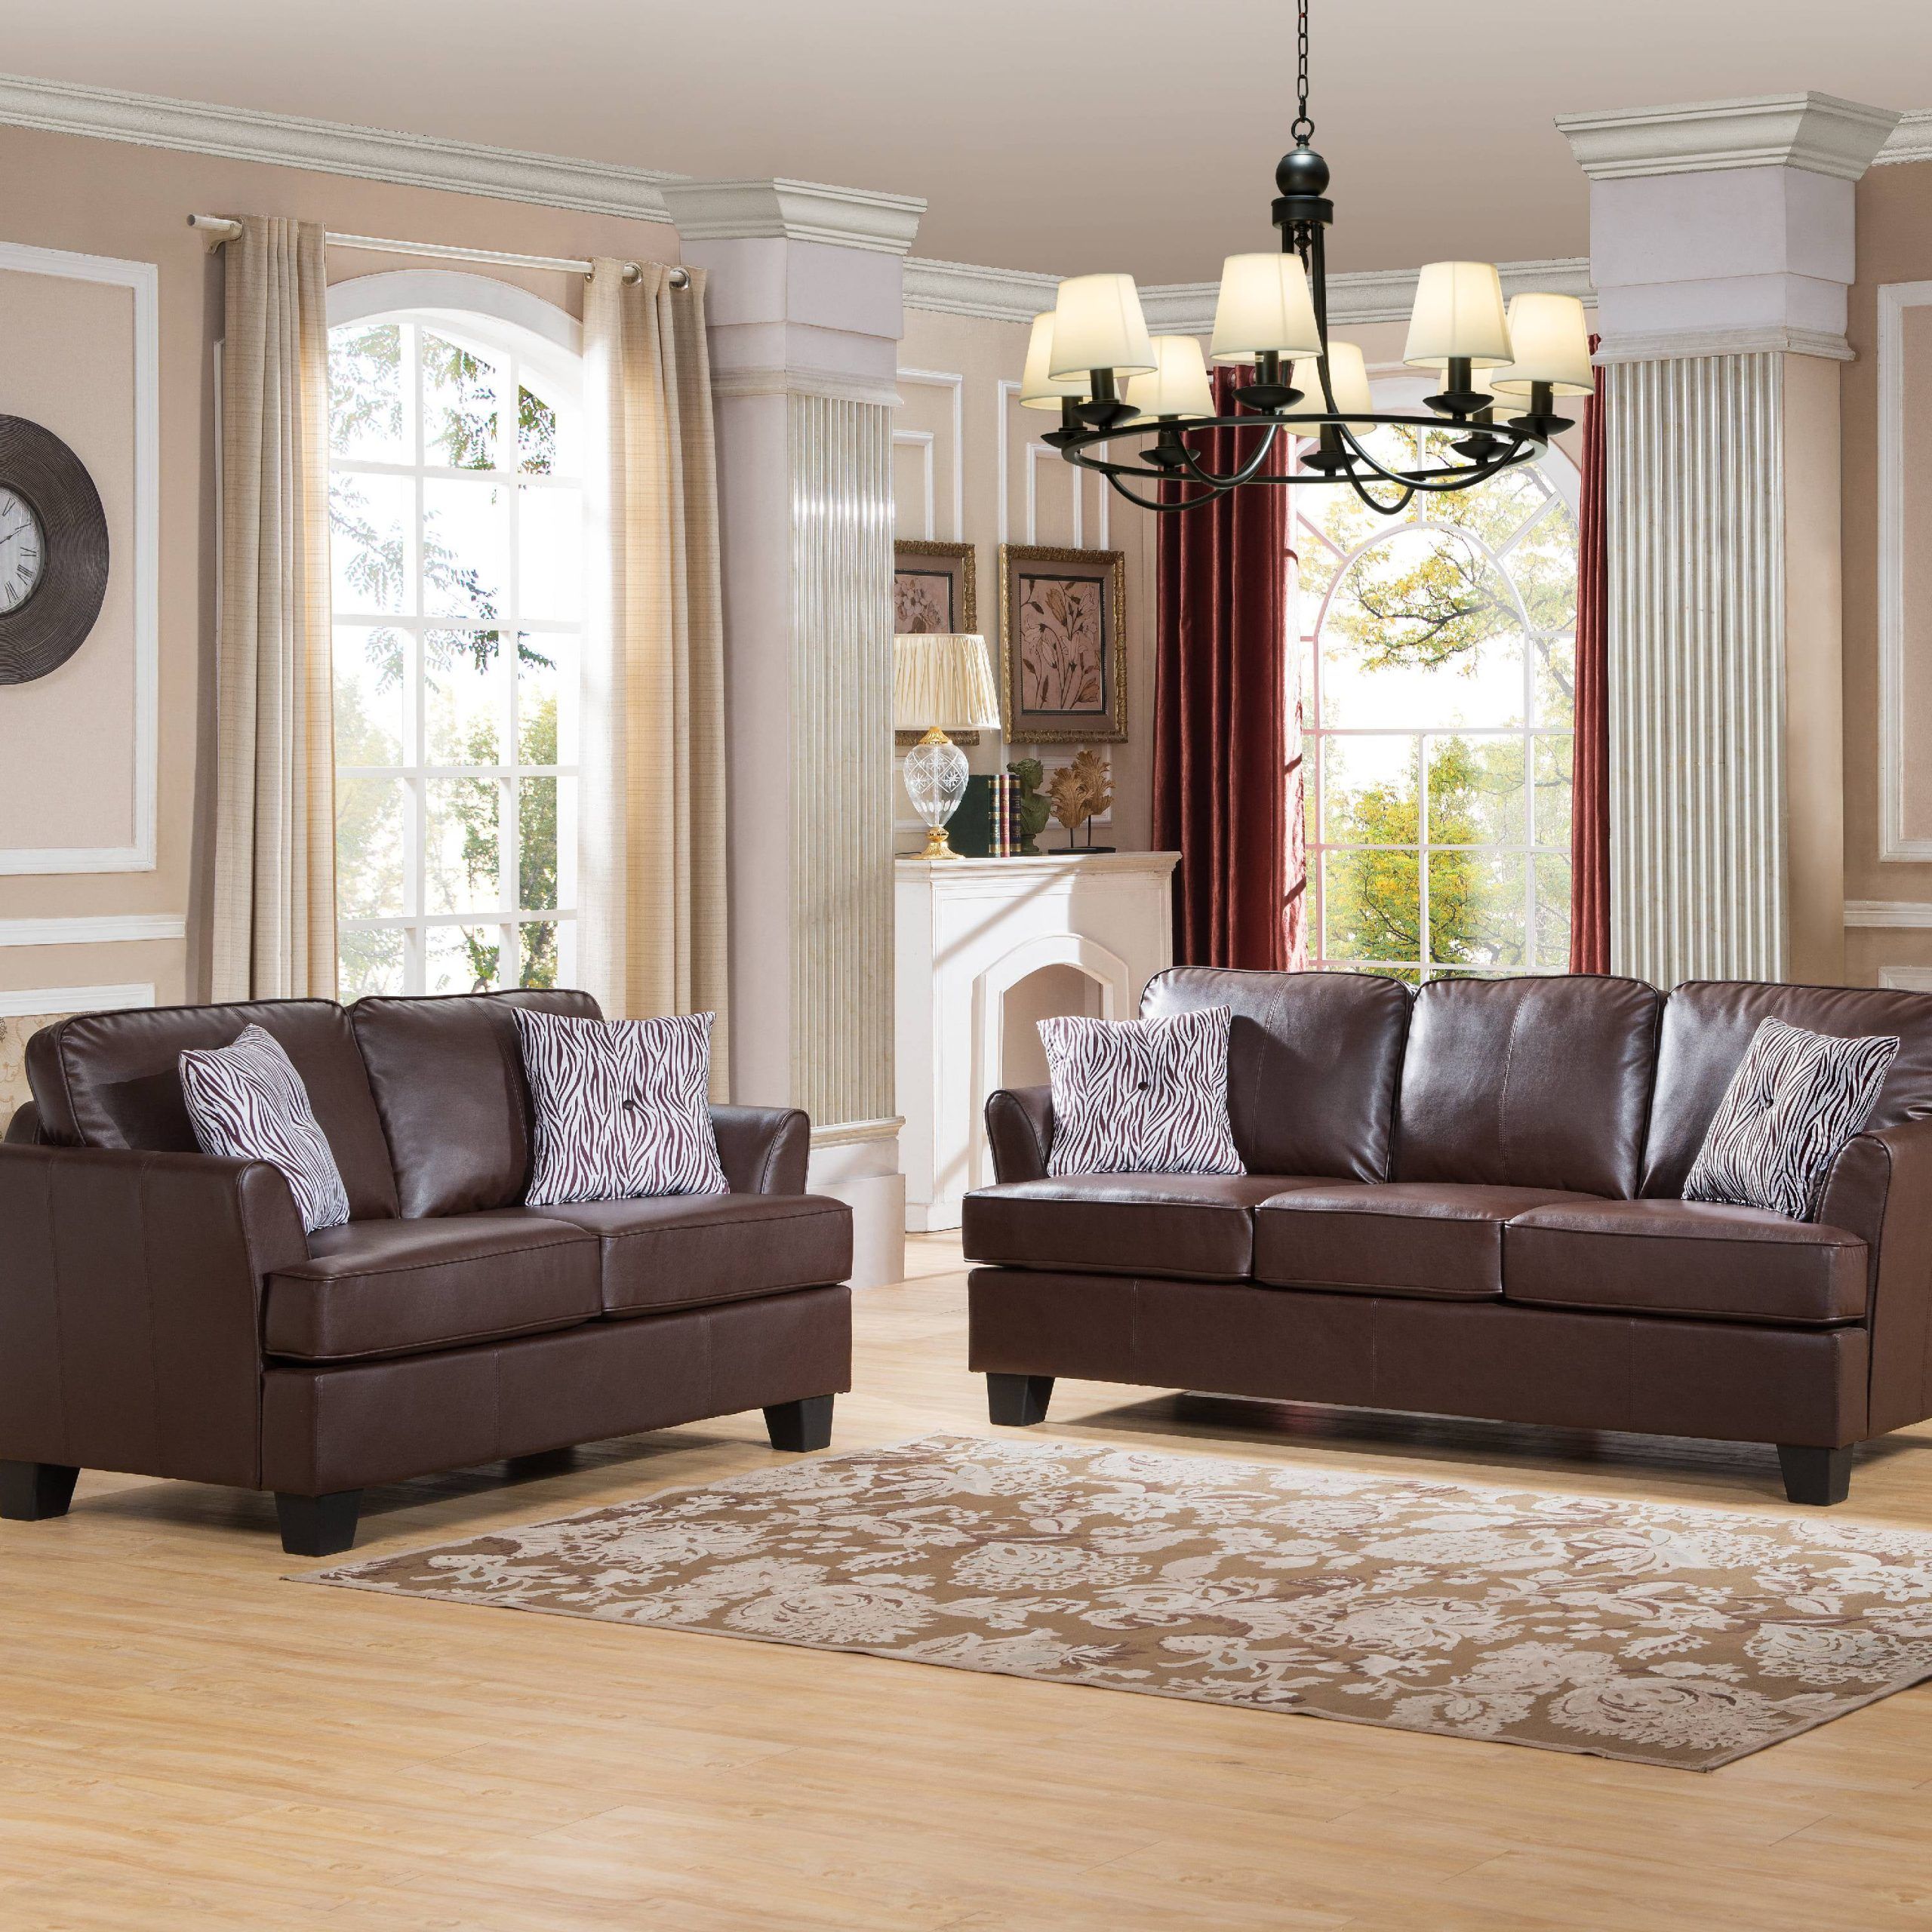 20+ Living Room Sofas Pertaining To Sofas For Living Rooms (Gallery 8 of 20)